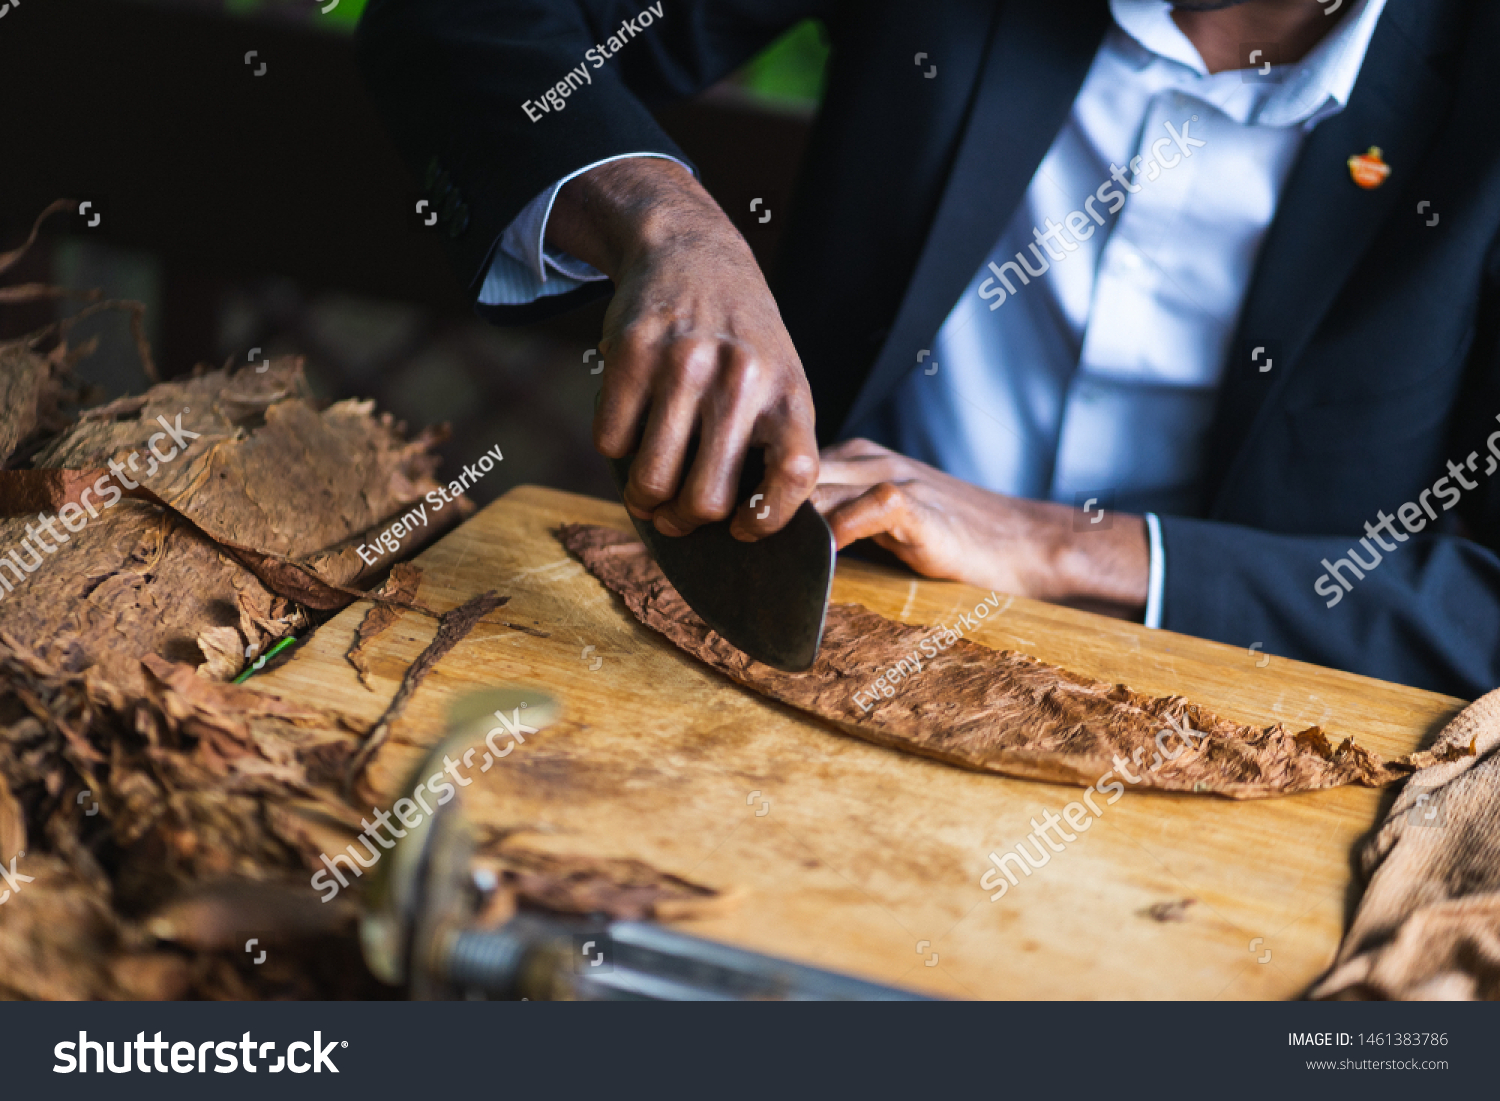 Process of making traditional cigars from tobacco leaves with hands using a mechanical device and press. Leaves of tobacco for making cigars. Close-up, soft focus and beautiful bokeh. #1461383786